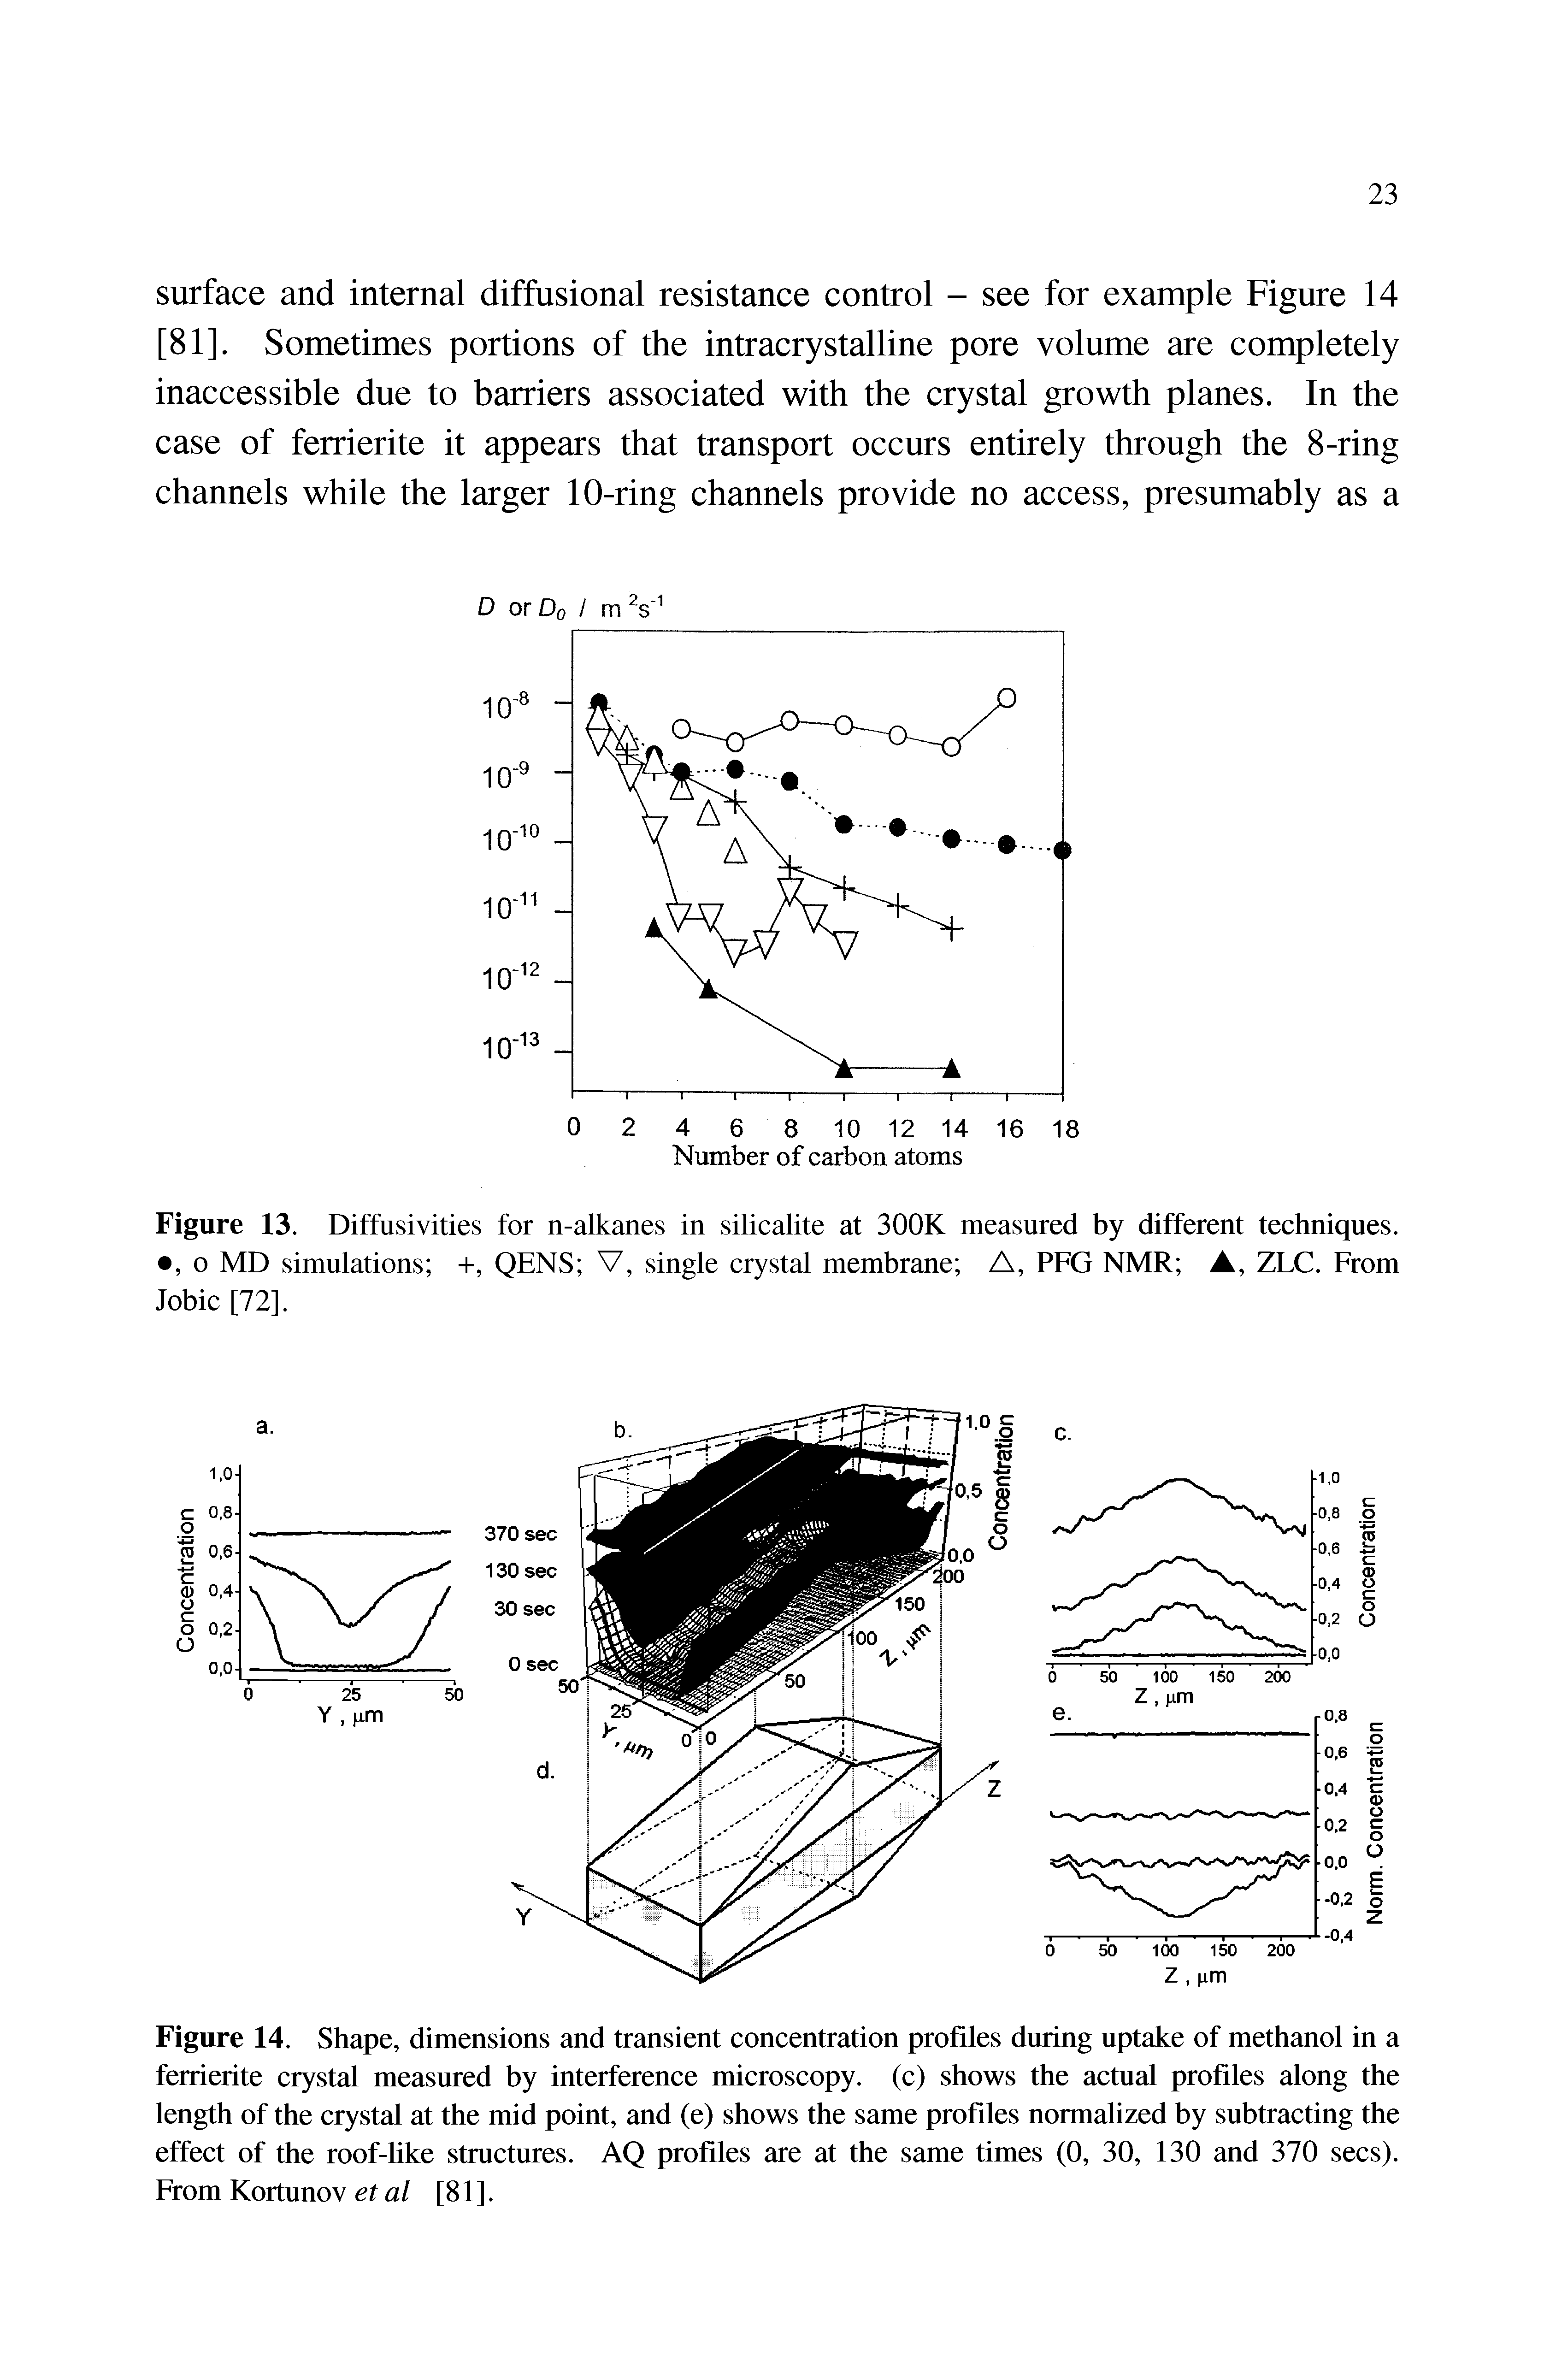 Figure 14. Shape, dimensions and transient concentration profiles during uptake of methanol in a ferrierite crystal measured by interference microscopy, (c) shows the actual profiles along the length of the crystal at the mid point, and (e) shows the same profiles normahzed by subtracting the effect of the roof-hke structures. AQ profiles are at the same times (0, 30, 130 and 370 secs). From Kortunov etal [81].